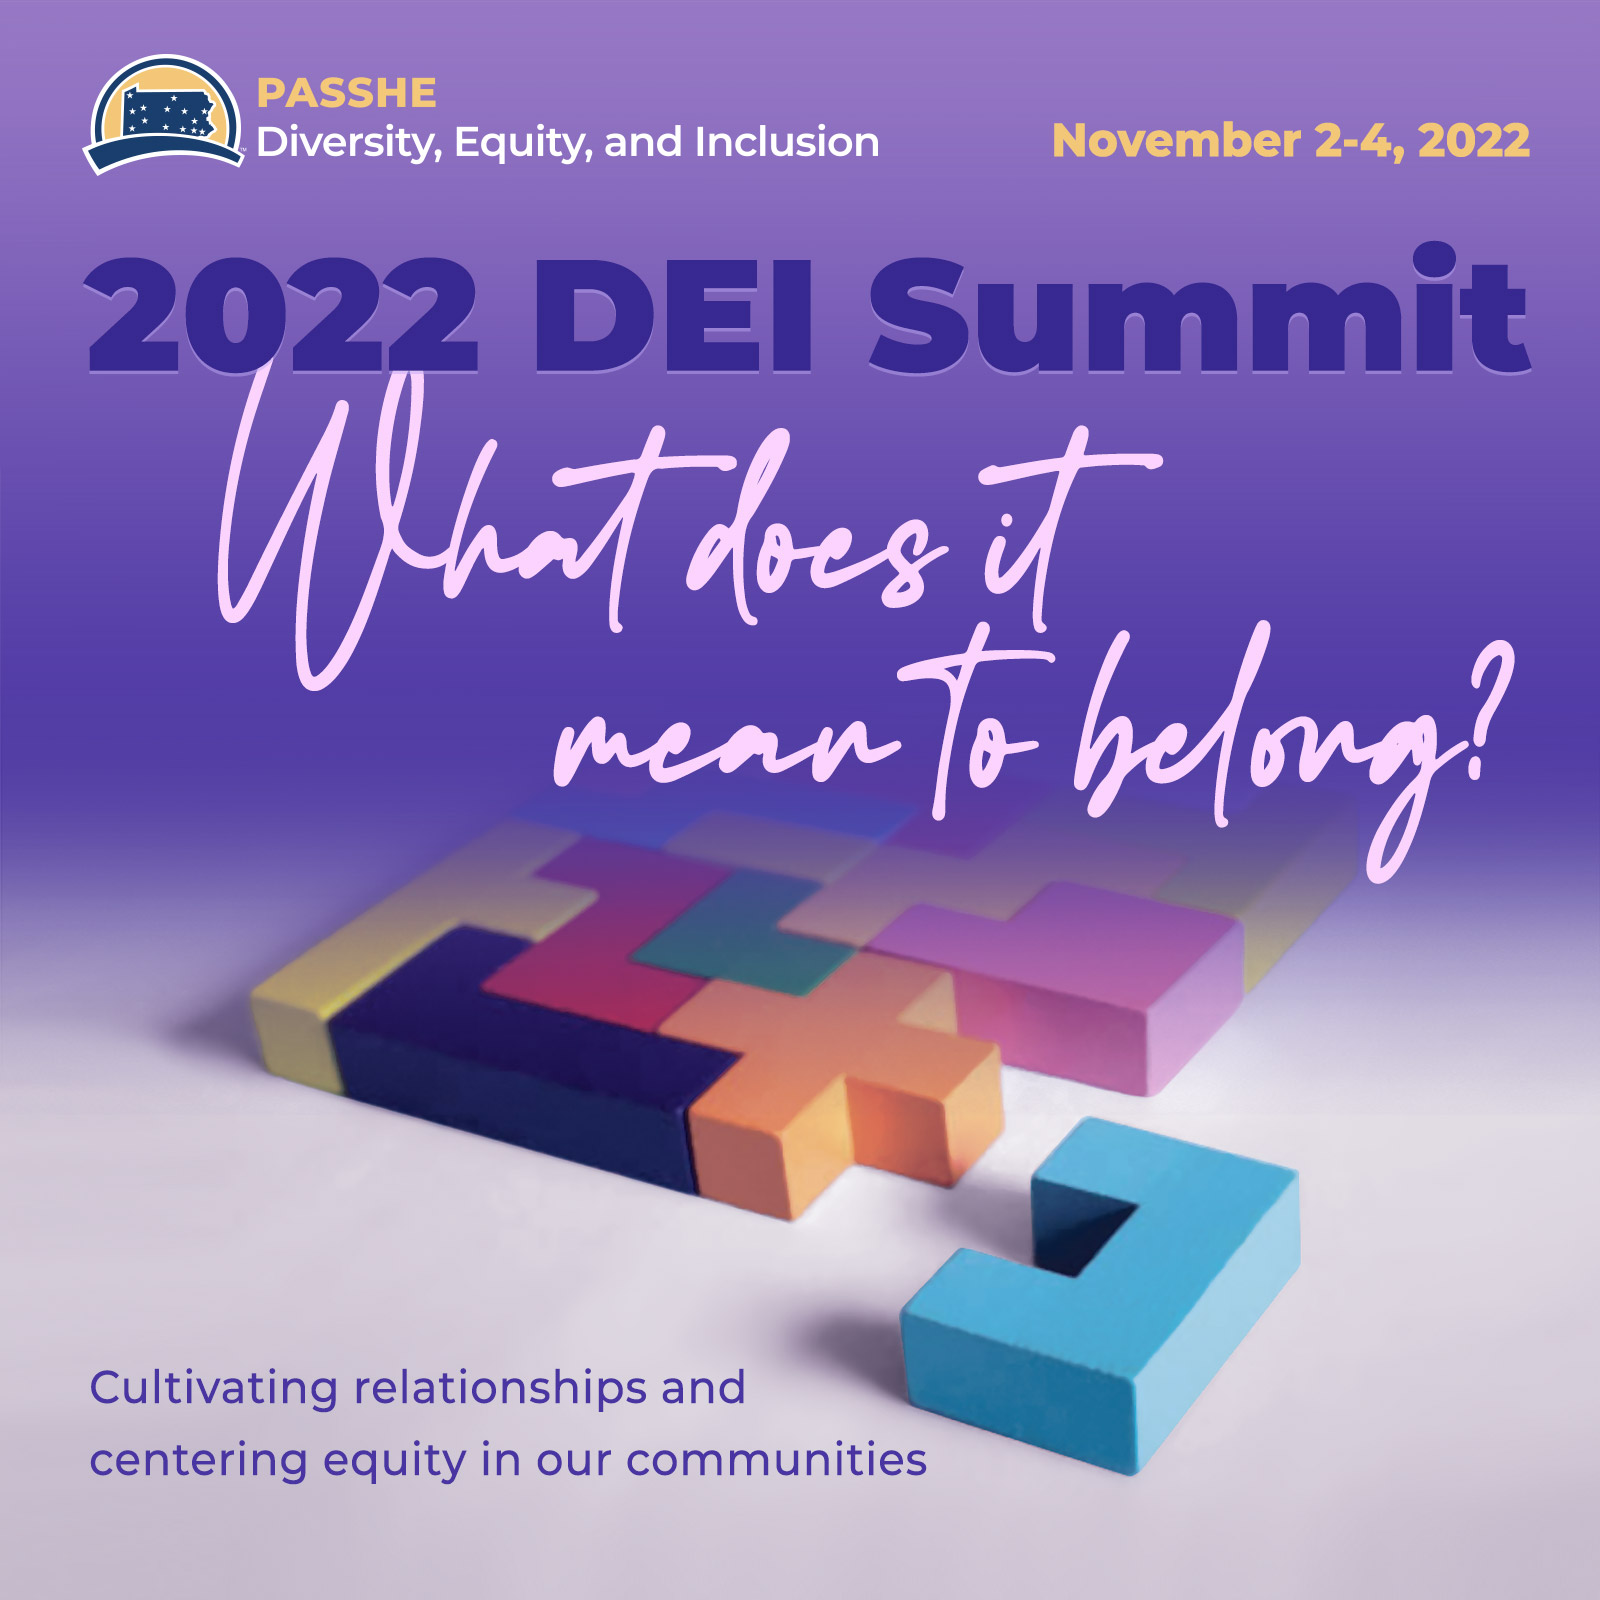 shades of purple with white text advertising PASSHE Diversity, Equity, & Inclusion Summit